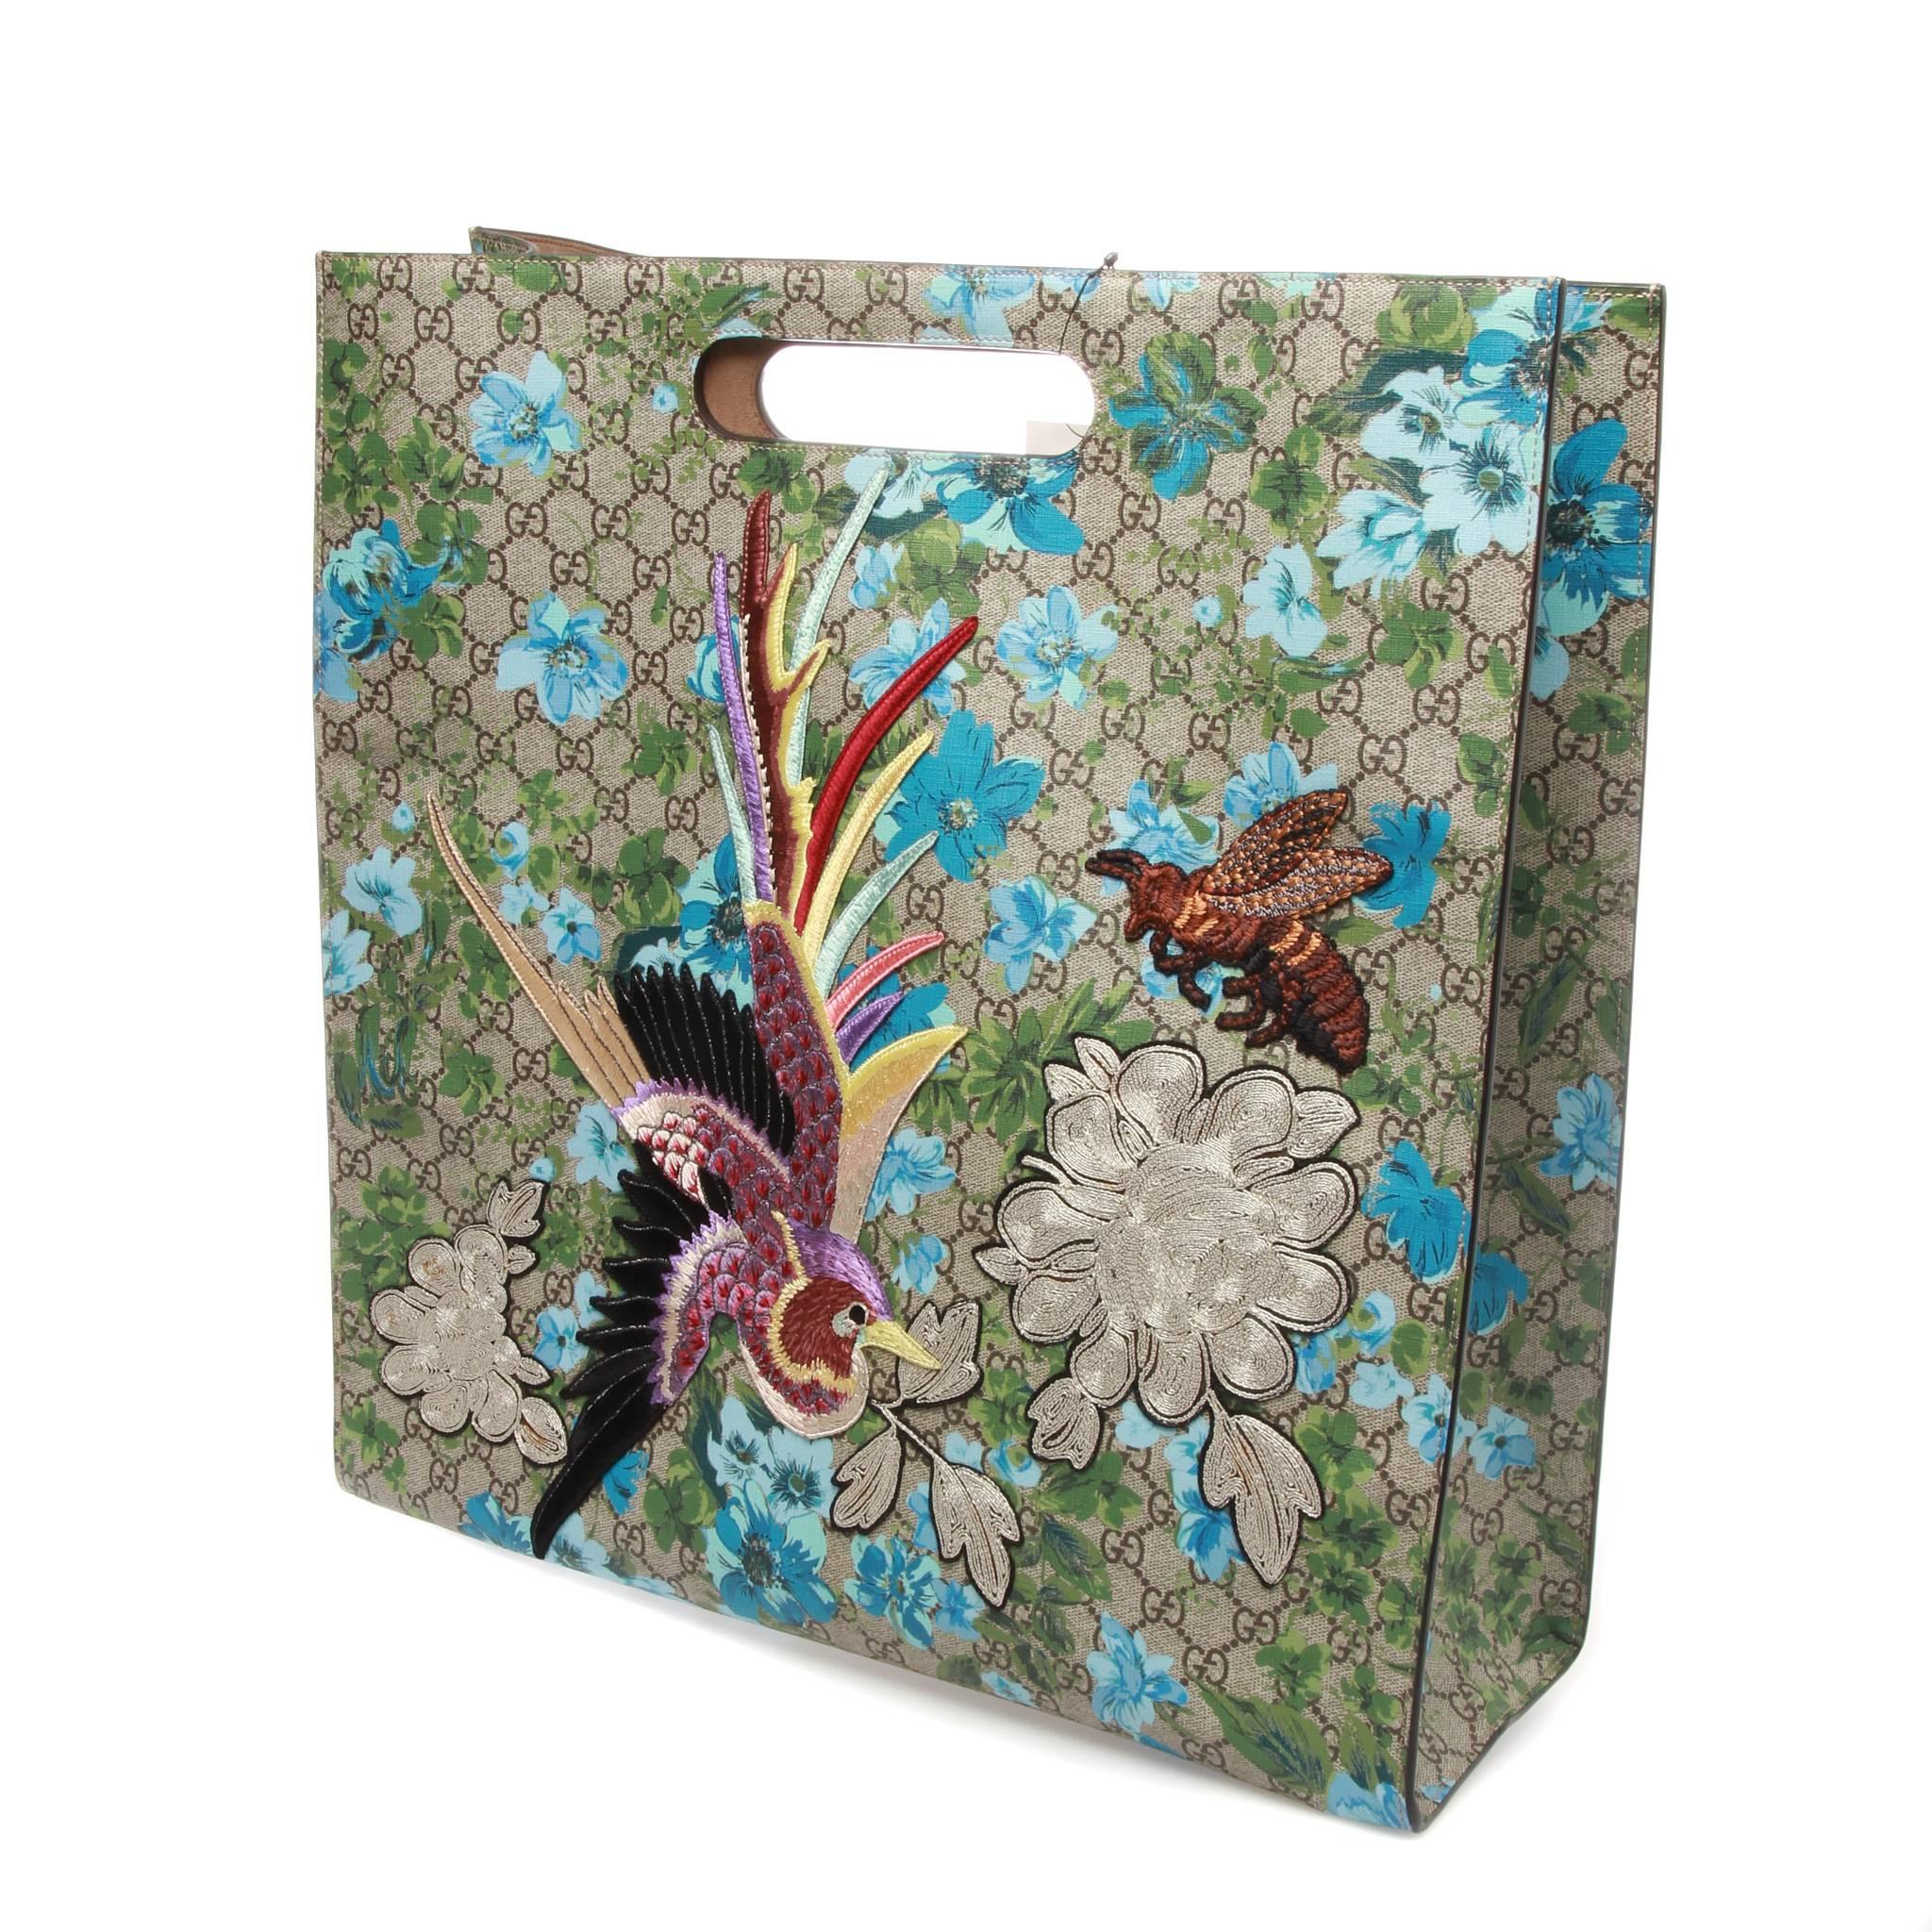 Unisex ebony and beige GG Supreme coated canvas Gucci XL GG Floral Print tote with dual cut-out handles, blue and green GG Blooms motif throughout, multicolor embroidered fauna embellishment at front face, tawny suede interior and open top.

Serial